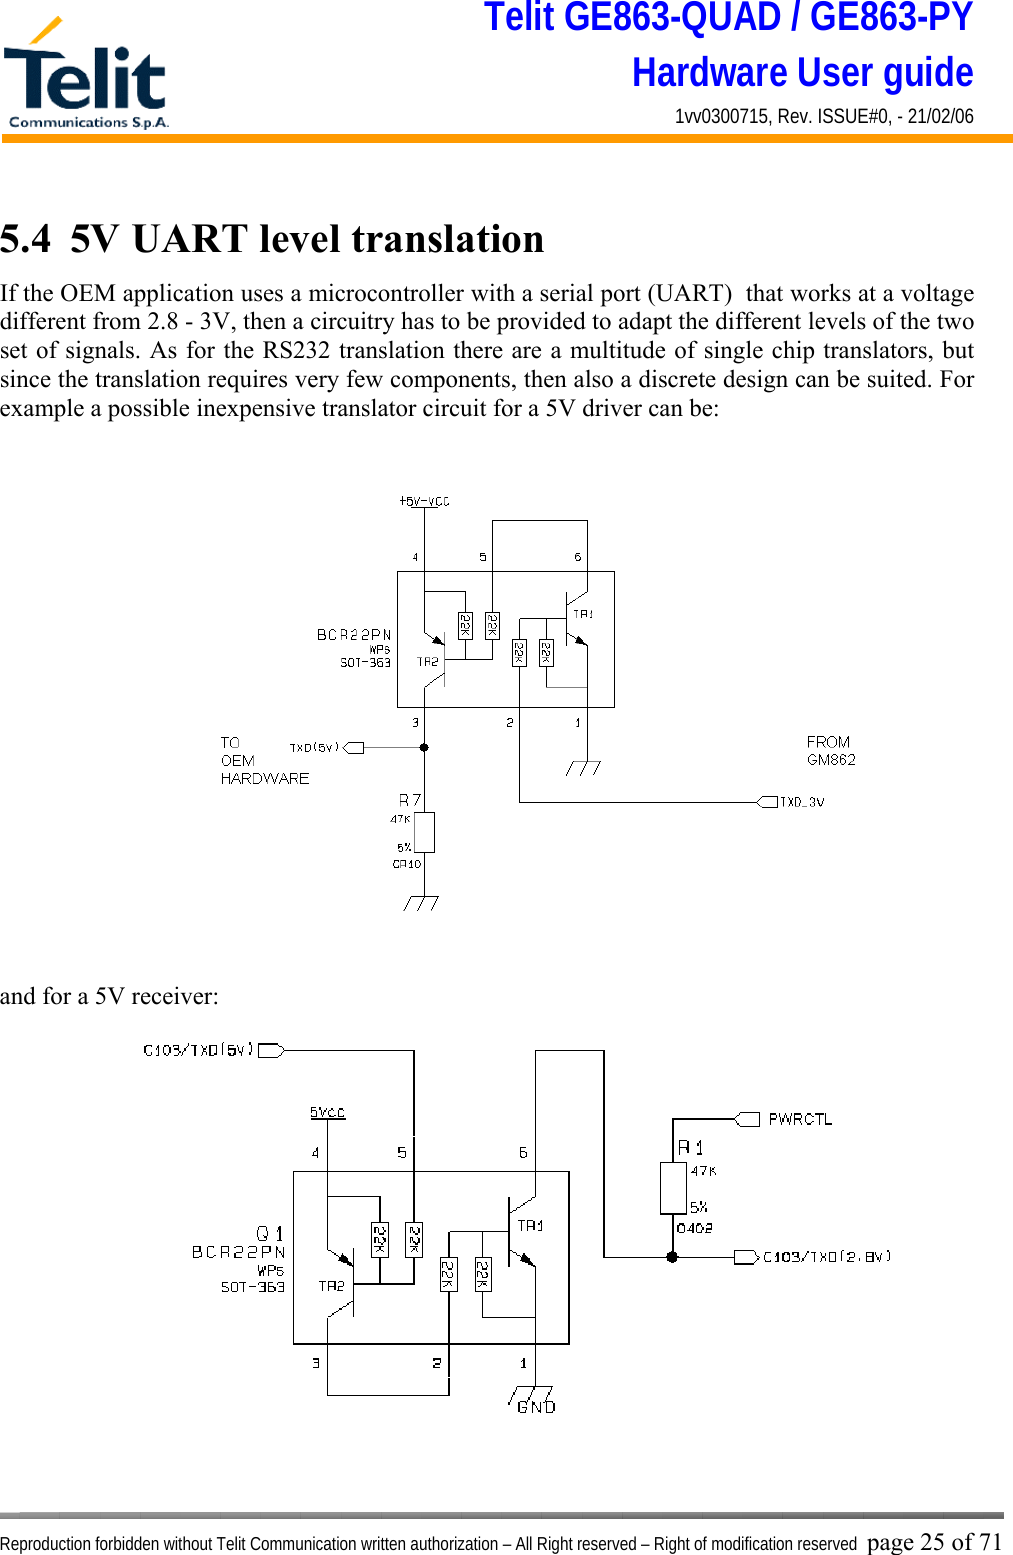 Telit GE863-QUAD / GE863-PY Hardware User guide 1vv0300715, Rev. ISSUE#0, - 21/02/06    Reproduction forbidden without Telit Communication written authorization – All Right reserved – Right of modification reserved page 25 of 71 5.4  5V UART level translation If the OEM application uses a microcontroller with a serial port (UART)  that works at a voltage different from 2.8 - 3V, then a circuitry has to be provided to adapt the different levels of the two set of signals. As for the RS232 translation there are a multitude of single chip translators, but since the translation requires very few components, then also a discrete design can be suited. For example a possible inexpensive translator circuit for a 5V driver can be:   and for a 5V receiver:  